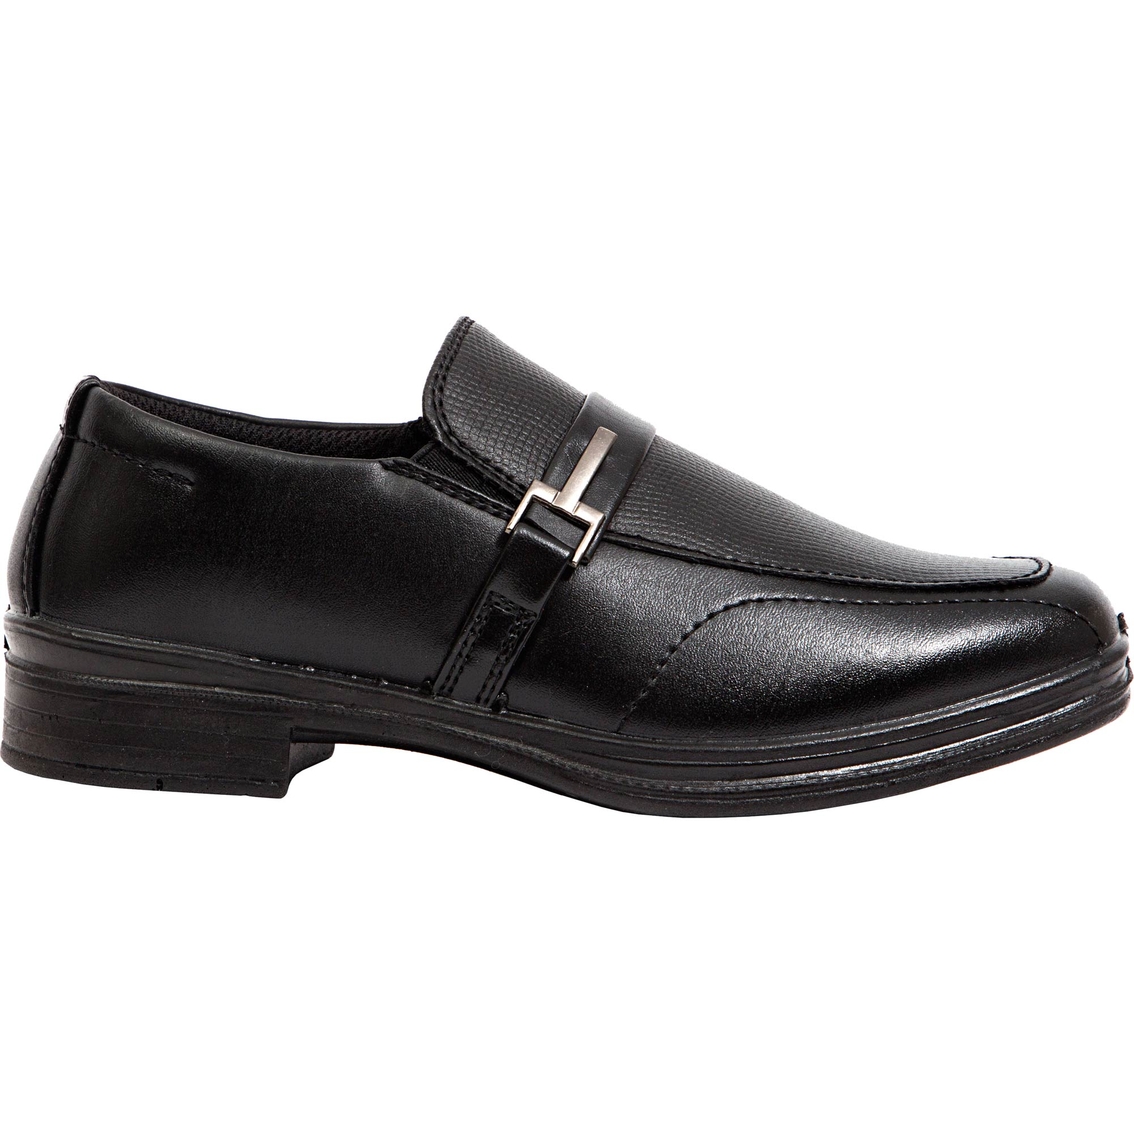 Deer Stags Boys Bold Dress Slip On Shoes - Image 2 of 6